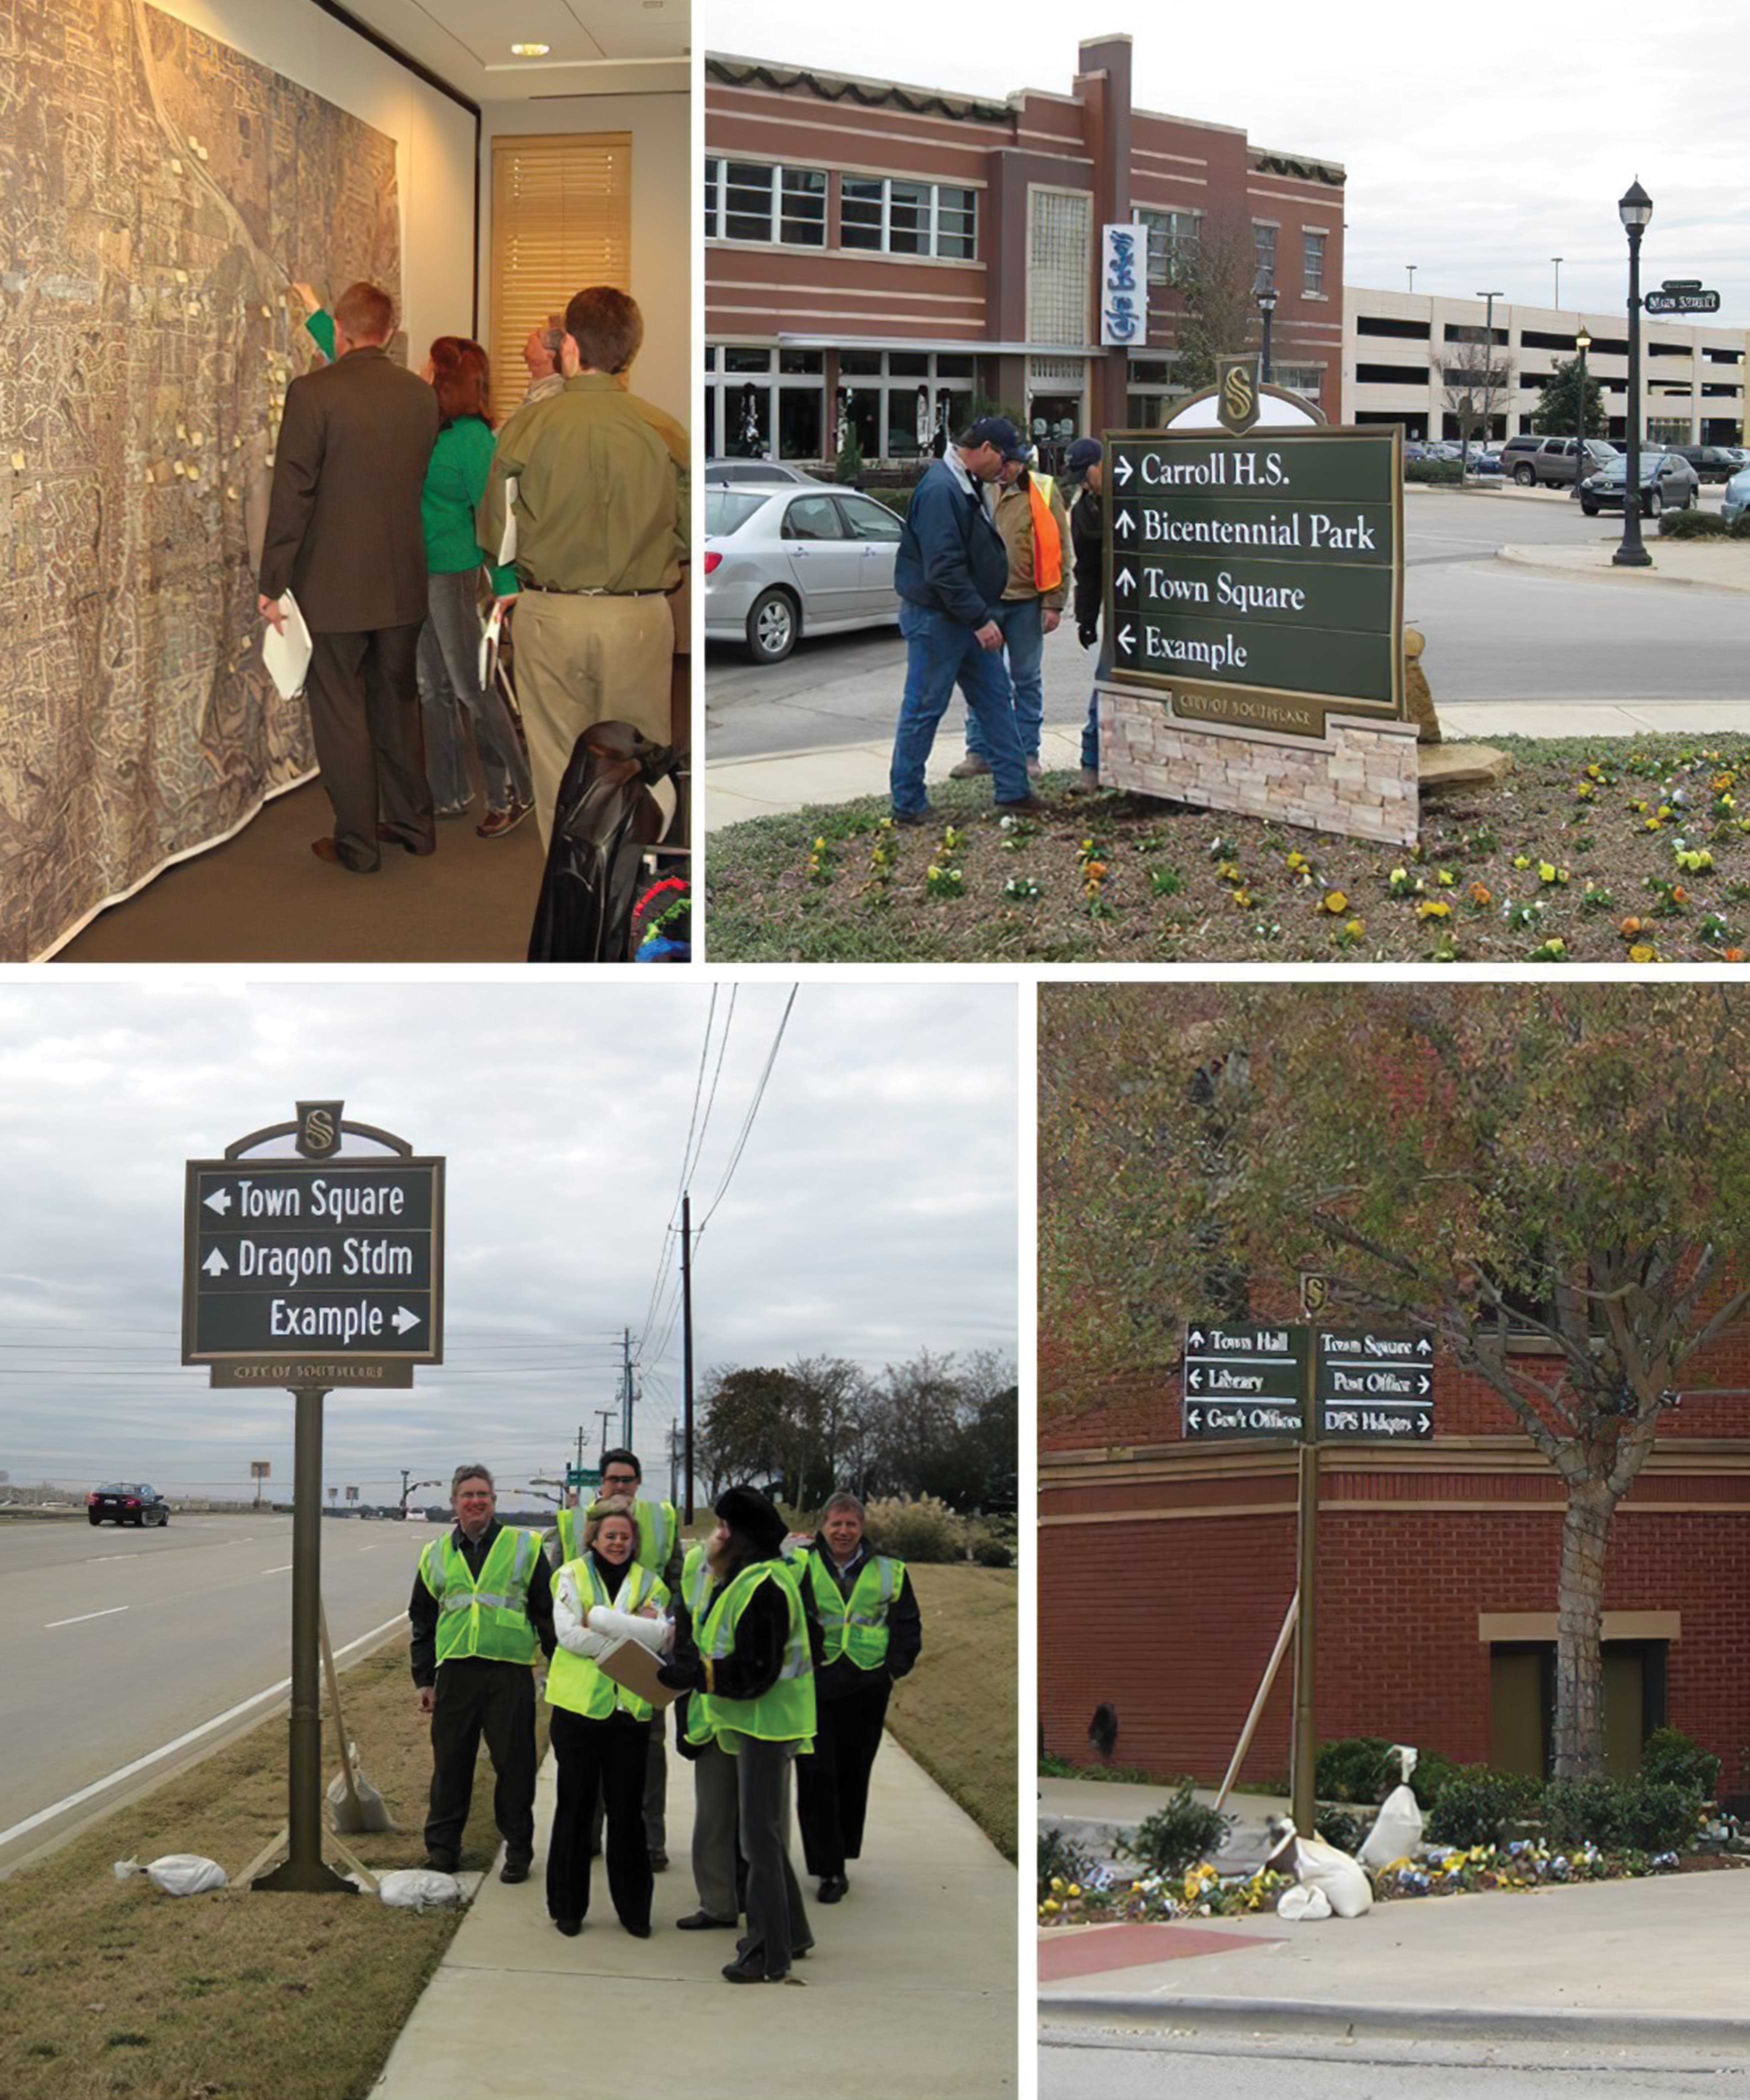 A number of photographs taken during the city review of the mock-ups of wayfinding signage.